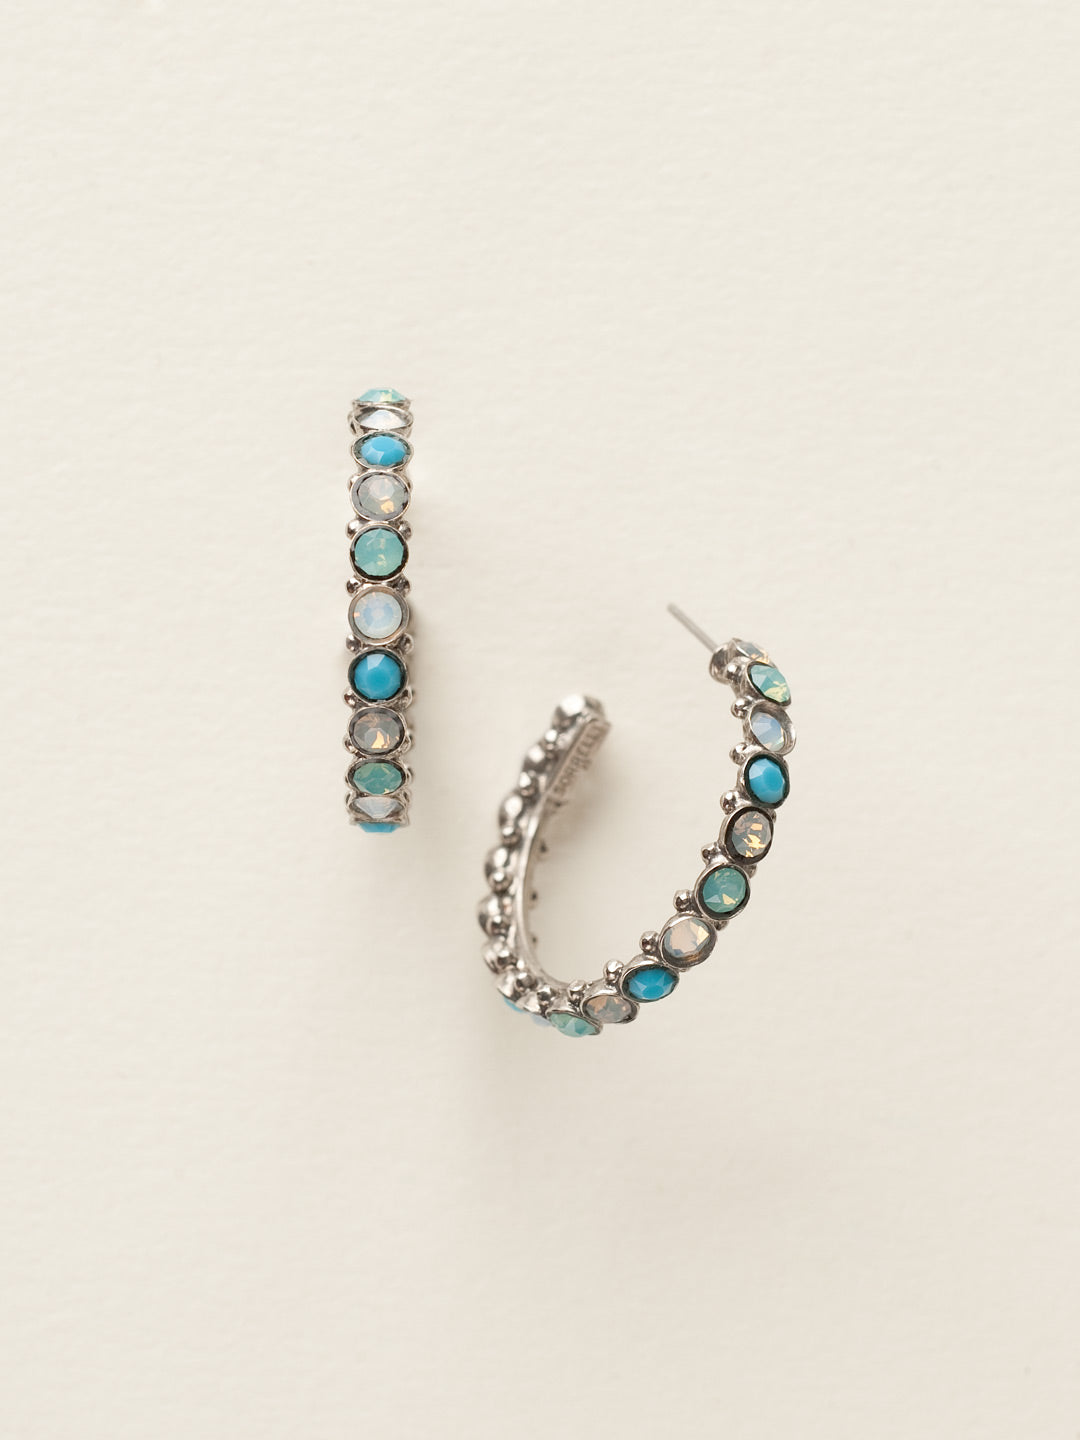 Heavenly Hoop Earrings - ECQ24ASAES - <p>Gemstones cover the outside of these hoop earrings. Their simple style combined with the sparkle of the jewels makes it the perfect staple piece for your jewelry box. From Sorrelli's Aegean Sea collection in our Antique Silver-tone finish.</p>